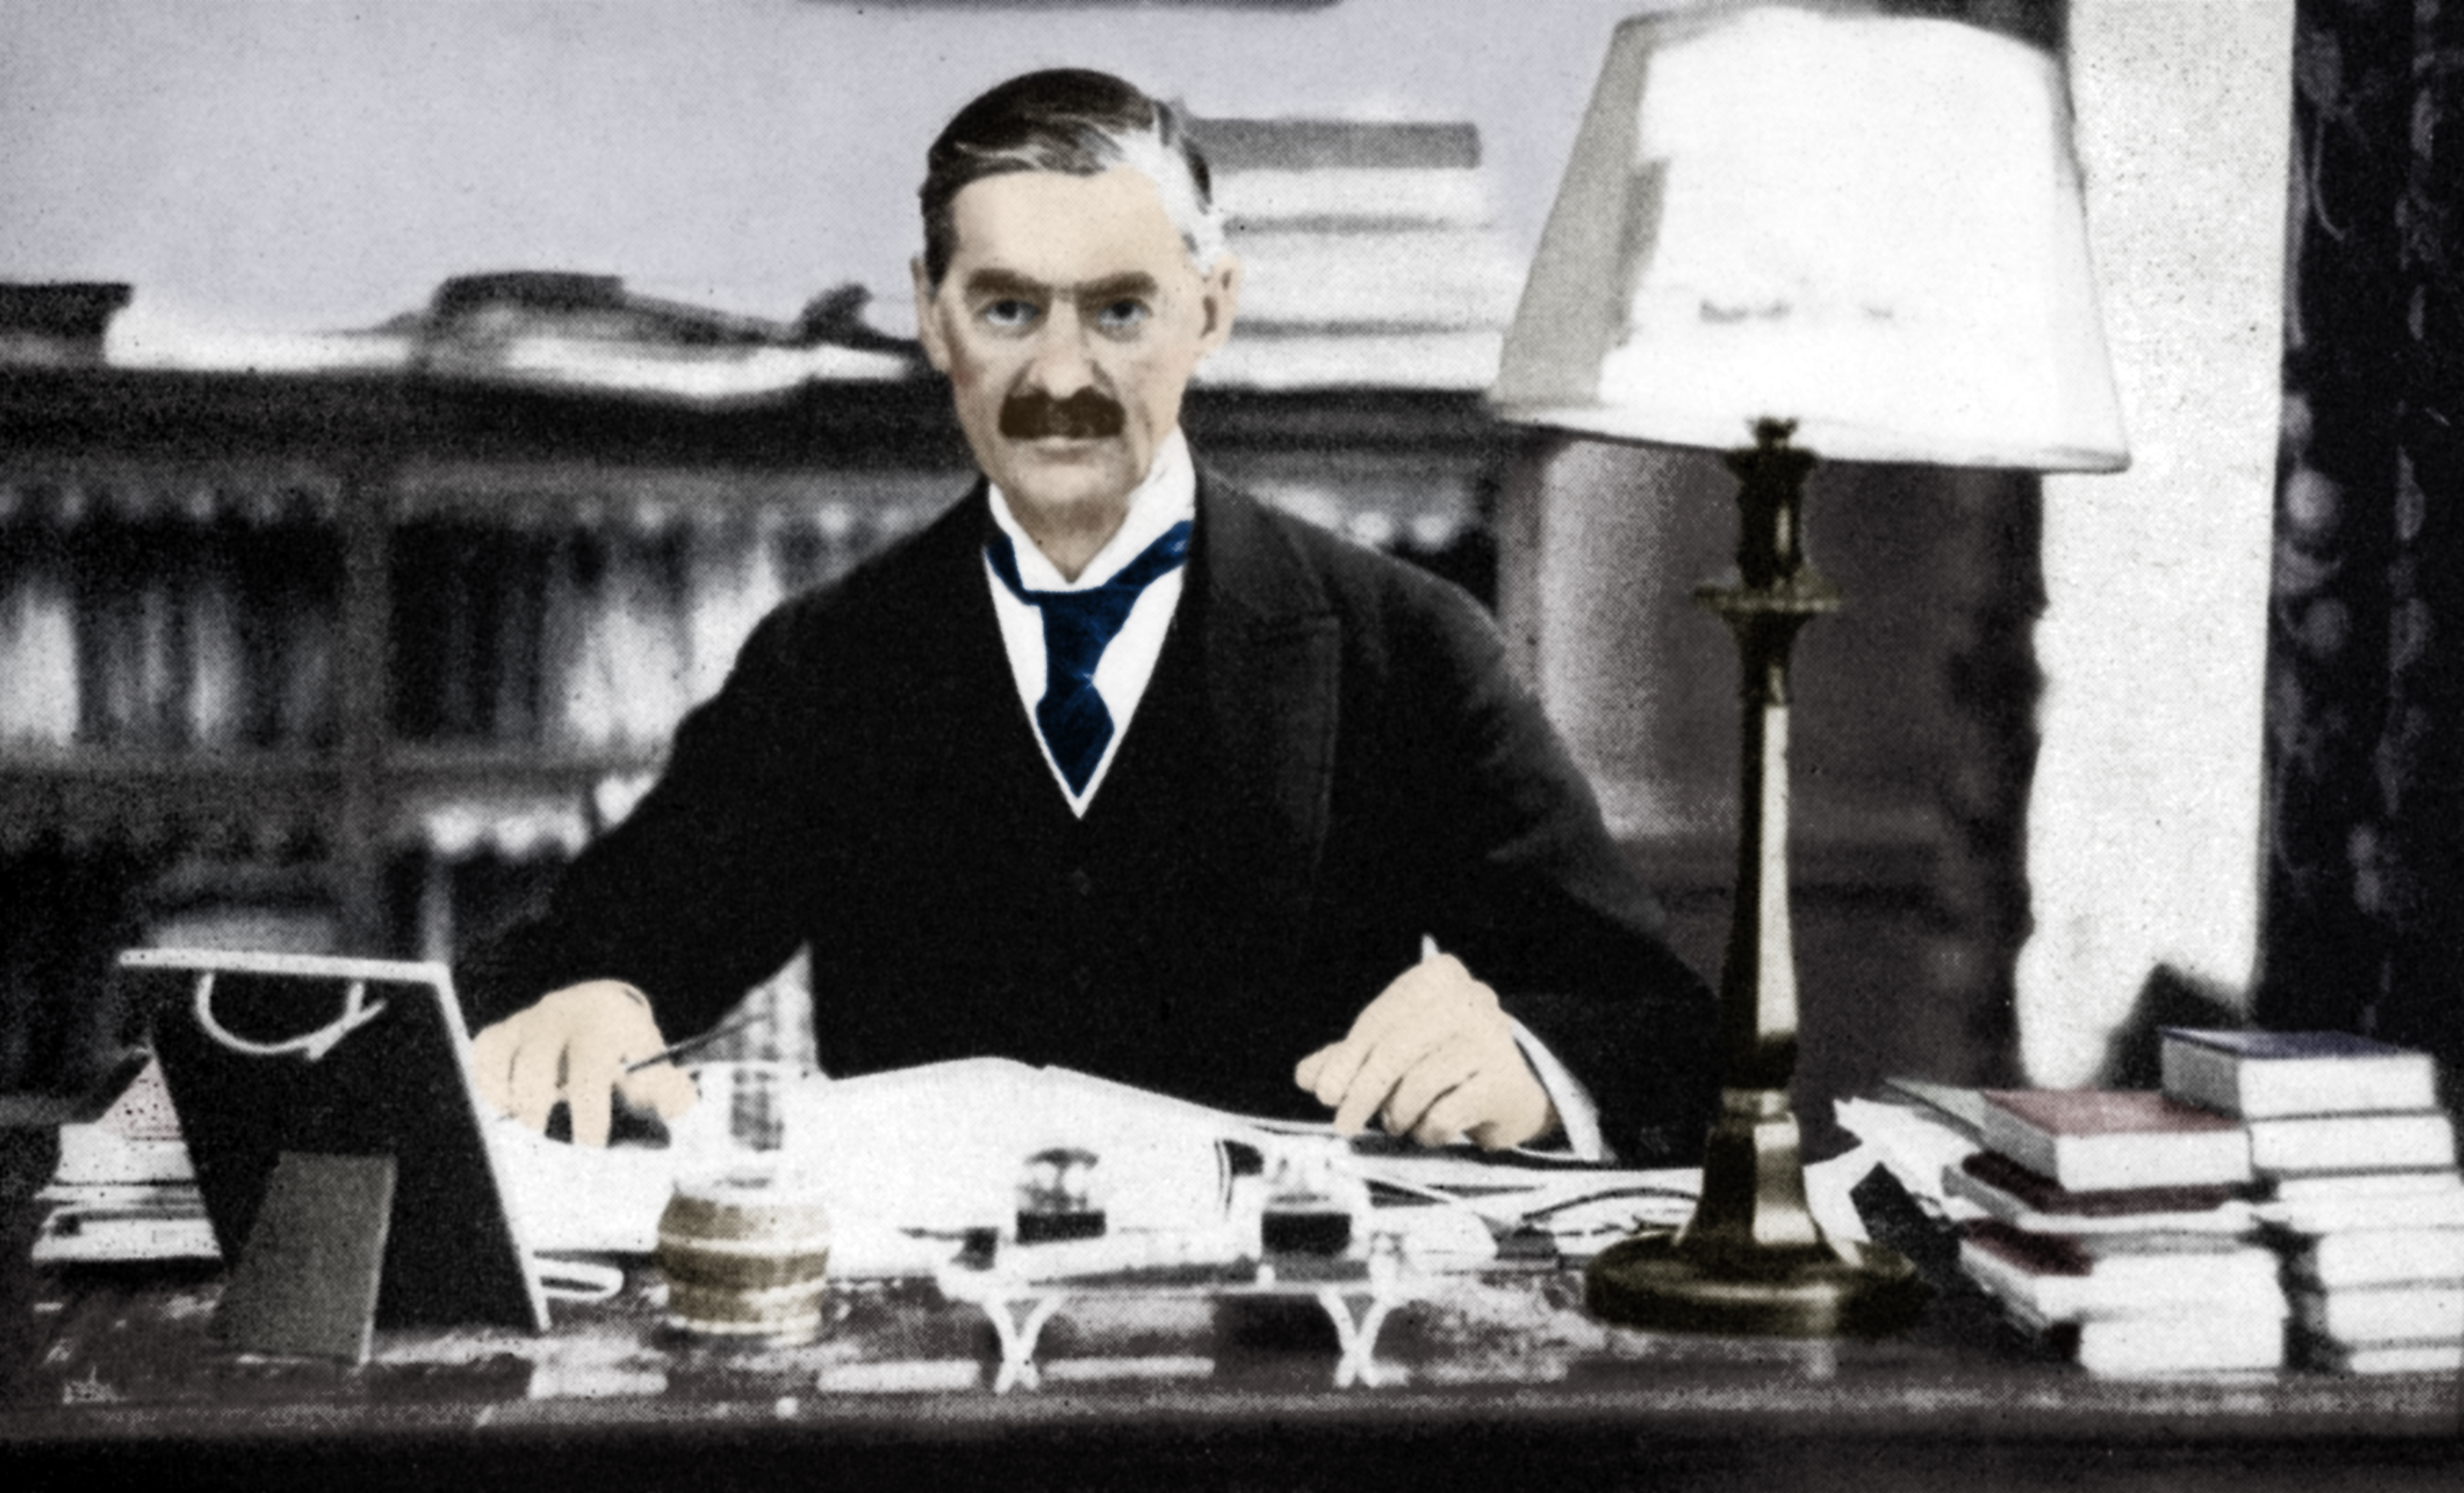 Neville Chamberlain (1869-1940), British prime minister, c1930s (1936). Following his election to parliament in 1918, Chamberlain served as postmaster general (1922-23), minister of health (1923, 1924-29, and 1931), and chancellor of the Exchequer (1923-24 and 1931-37) before he succeeded Stanley Baldwin as prime minister. His policy of appeasement toward Adolf Hitlers Germany culminated in the Munich Pact of September 1938, after which Chamberlain returned home proclaiming peace for our time. Later he recognized the failure of his policy and vowed support for Poland. After Germanys invasion of that country, Chamberlain led Britain into the war against the aggressor. He was forced to resign in May 1940 and was succeeded by Sir Winston Churchill. He served in Churchills cabinet as lord president of the council until October 1940, when illness forced his resignation. He died the following month. From His Majesty the King, 1910-1935, introduction by HW Wilson (Associated Newspapers Ltd, London, 1936). (Colorised black and white print). Artist Unknown. (Photo by The Print Collector/Getty Images)